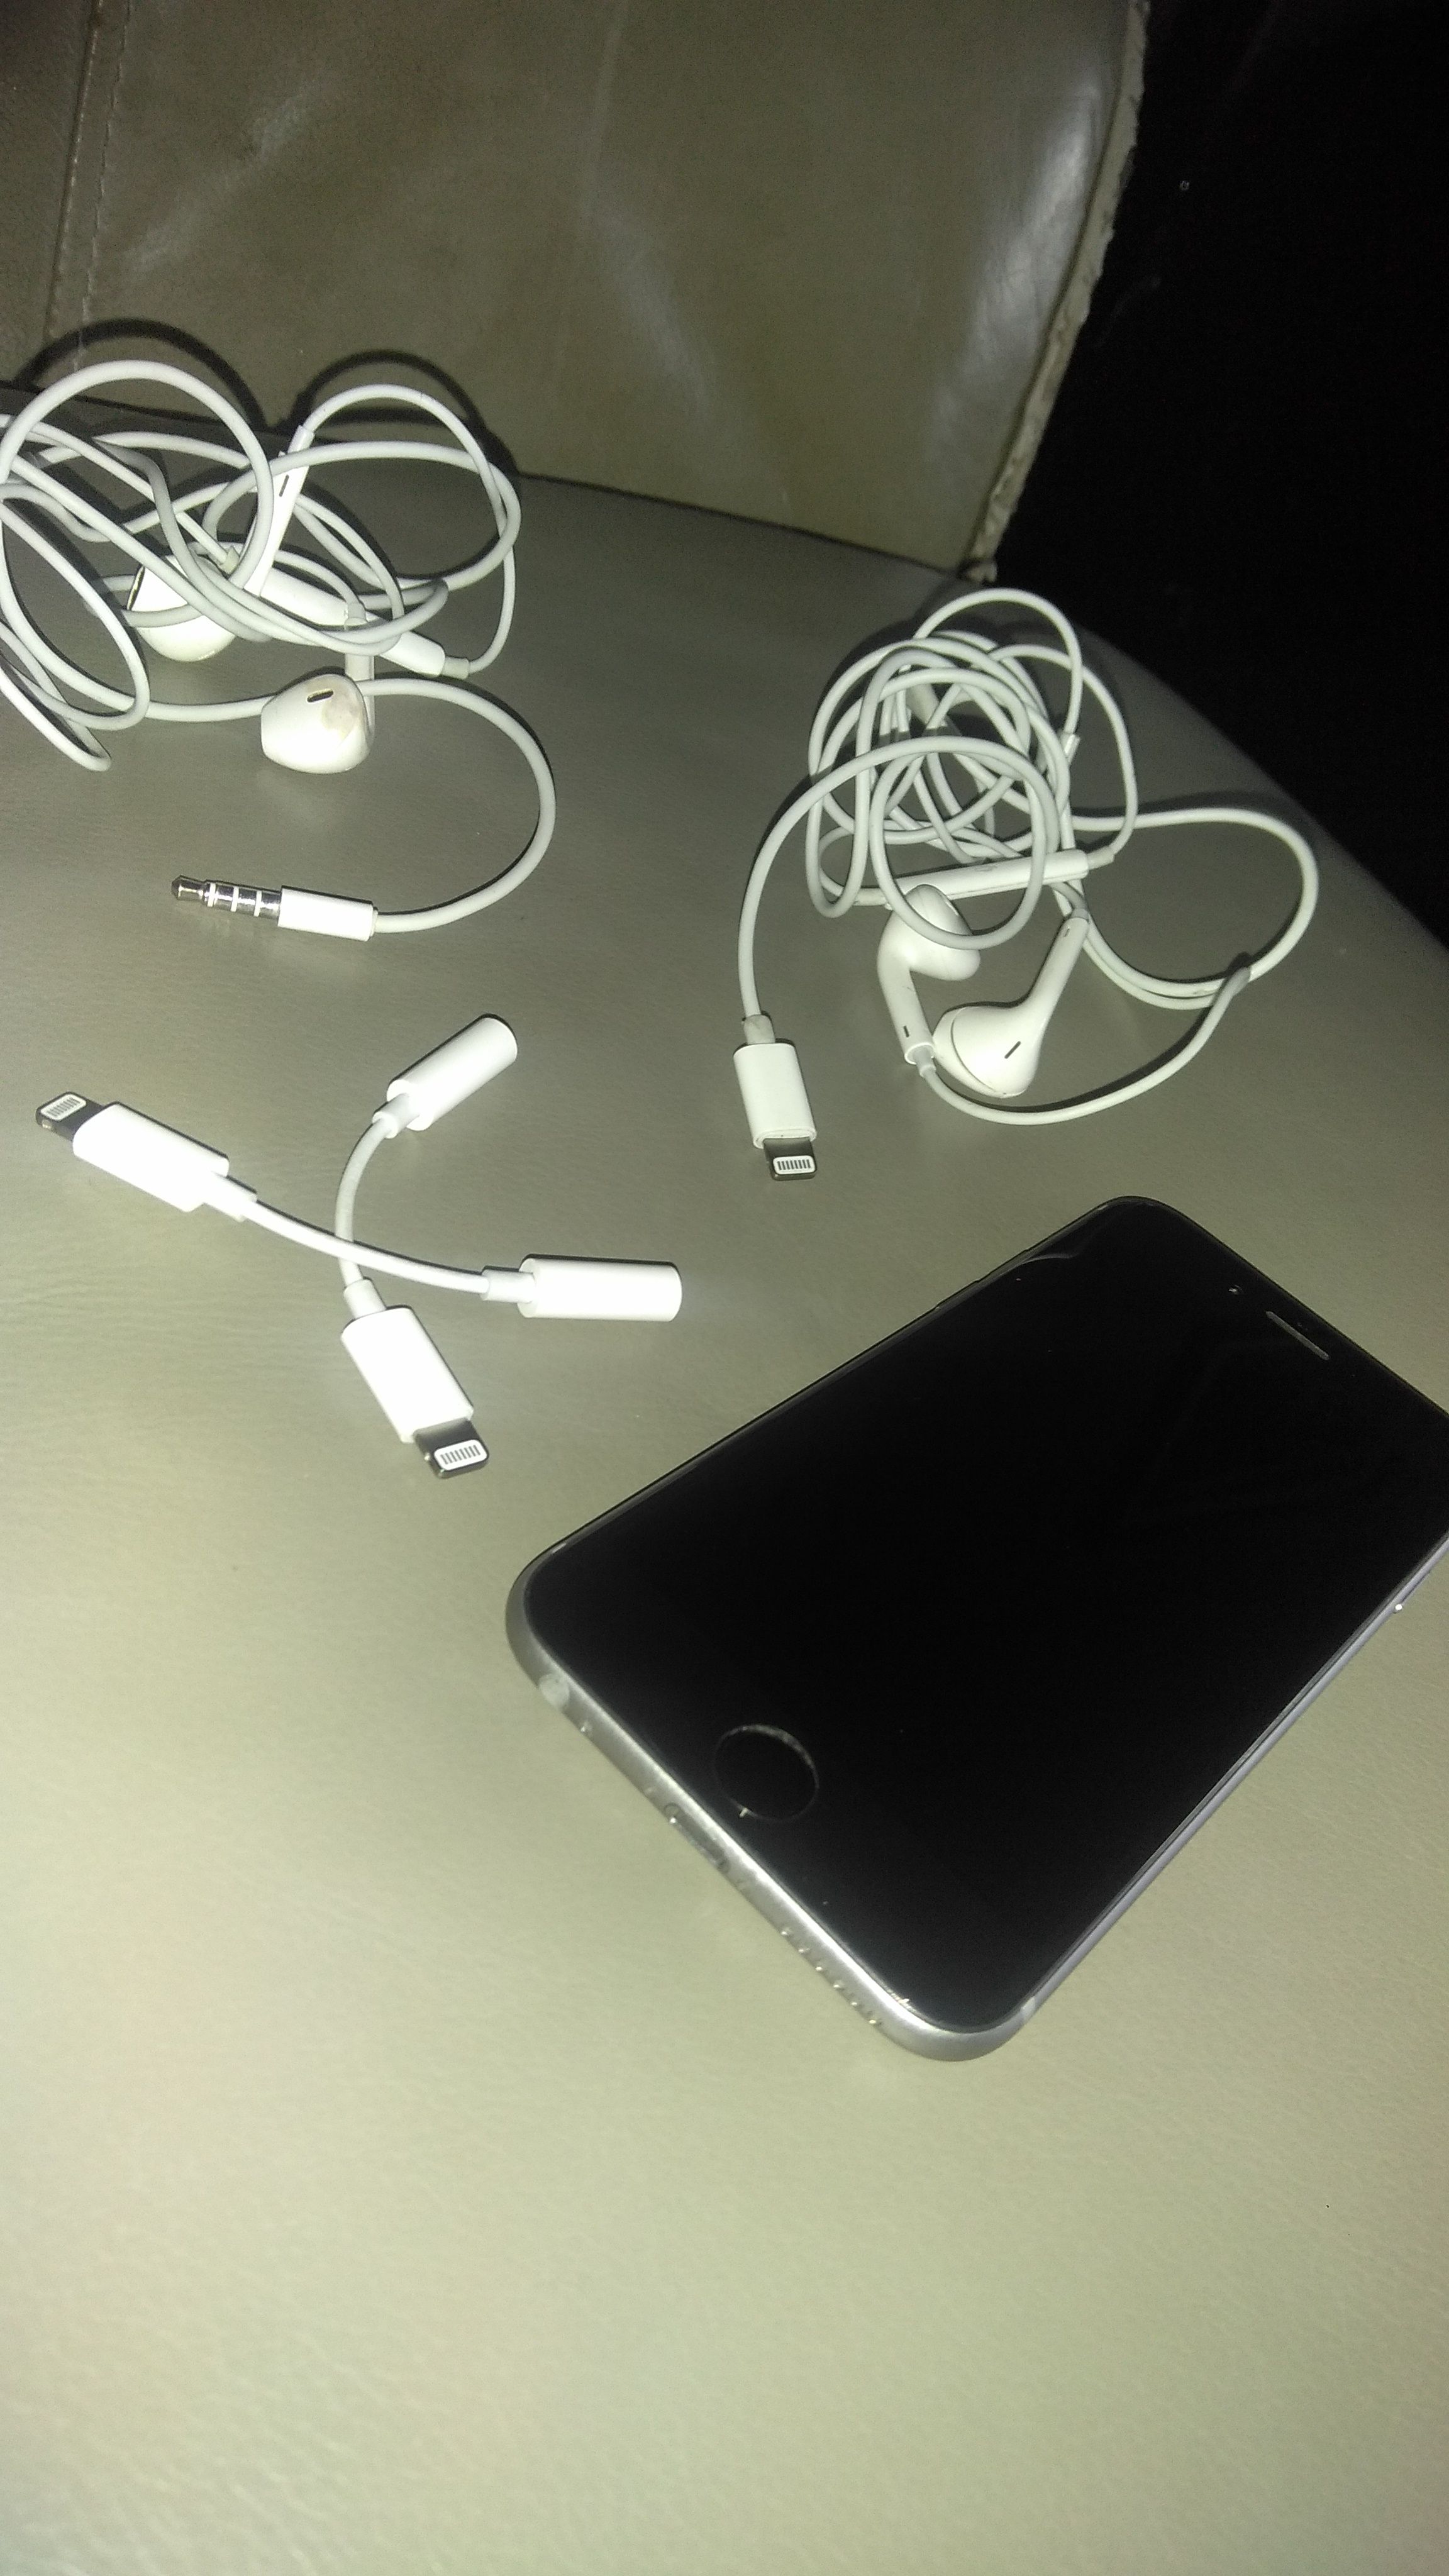 IPhone 6 locked plus two headphone and two Lightning Jack